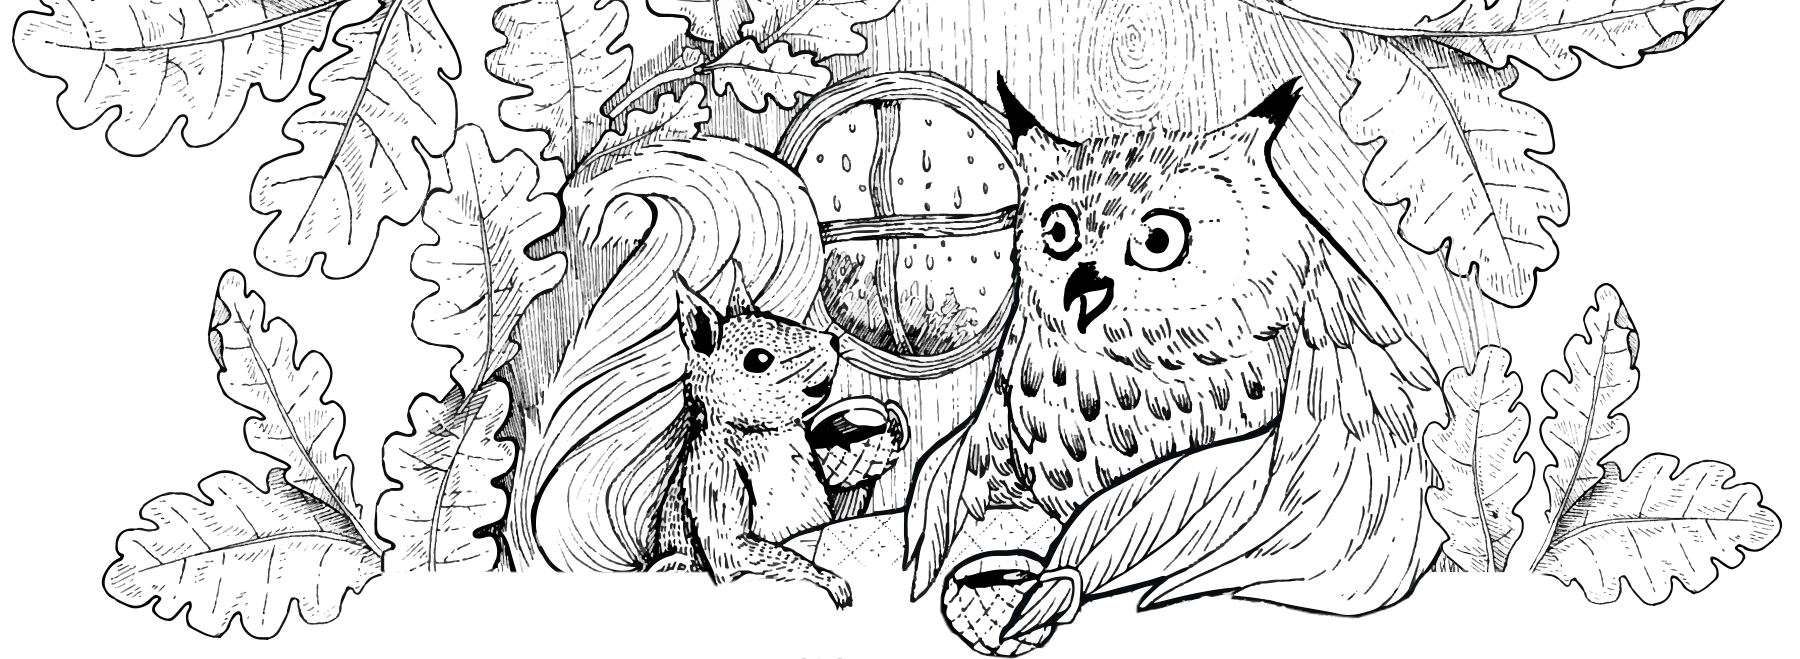 Squirrel and Owl conversing over tea